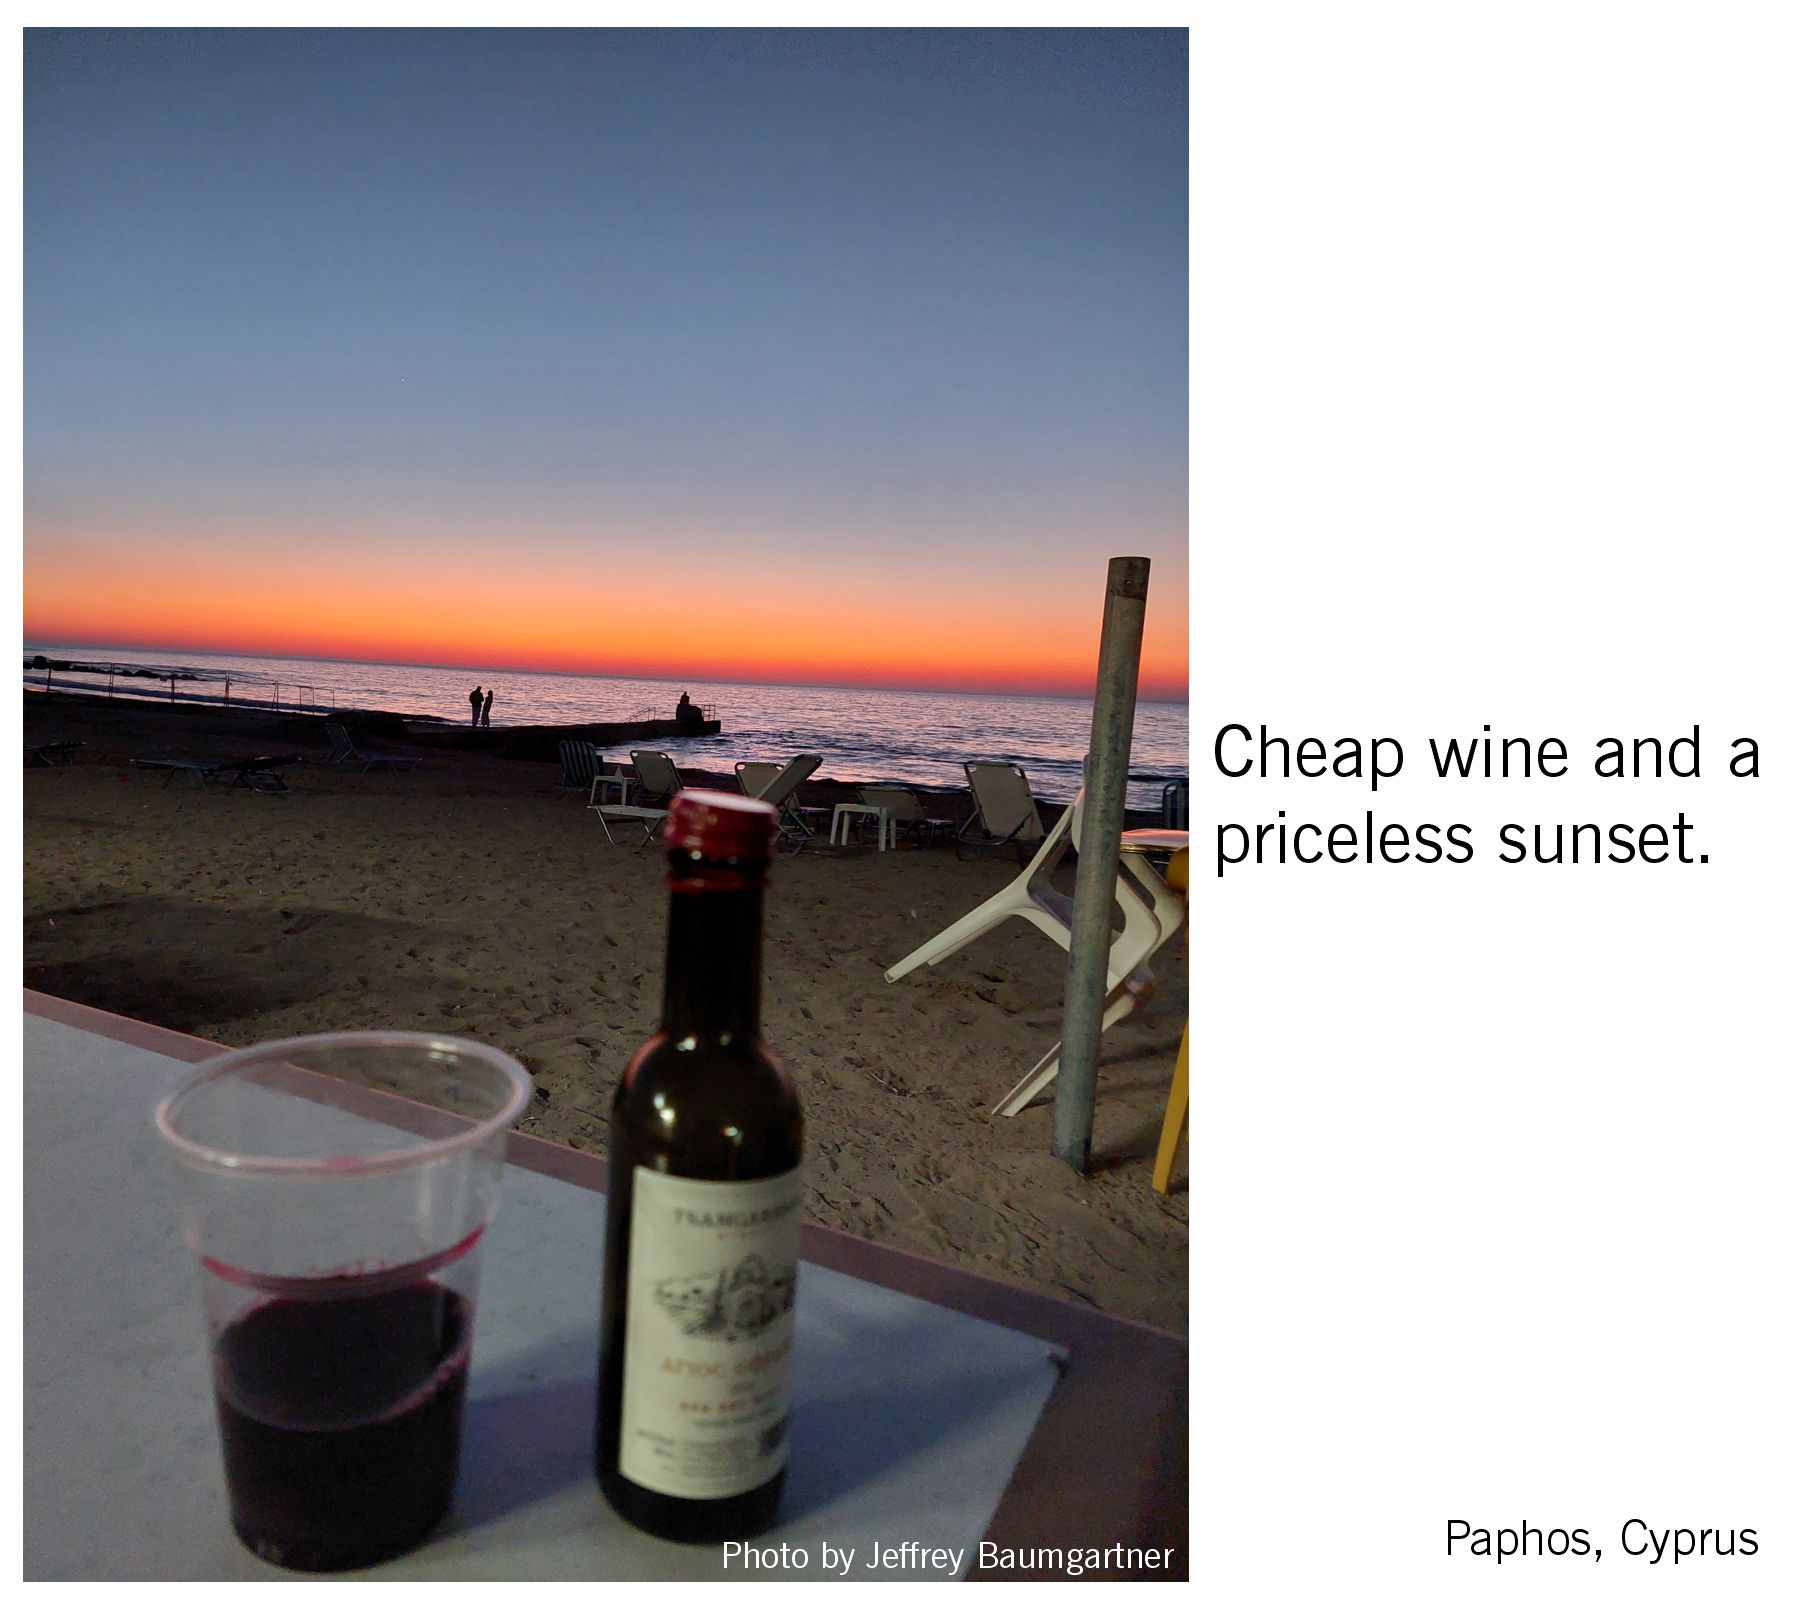 Cheap wine and a priceless sunset.